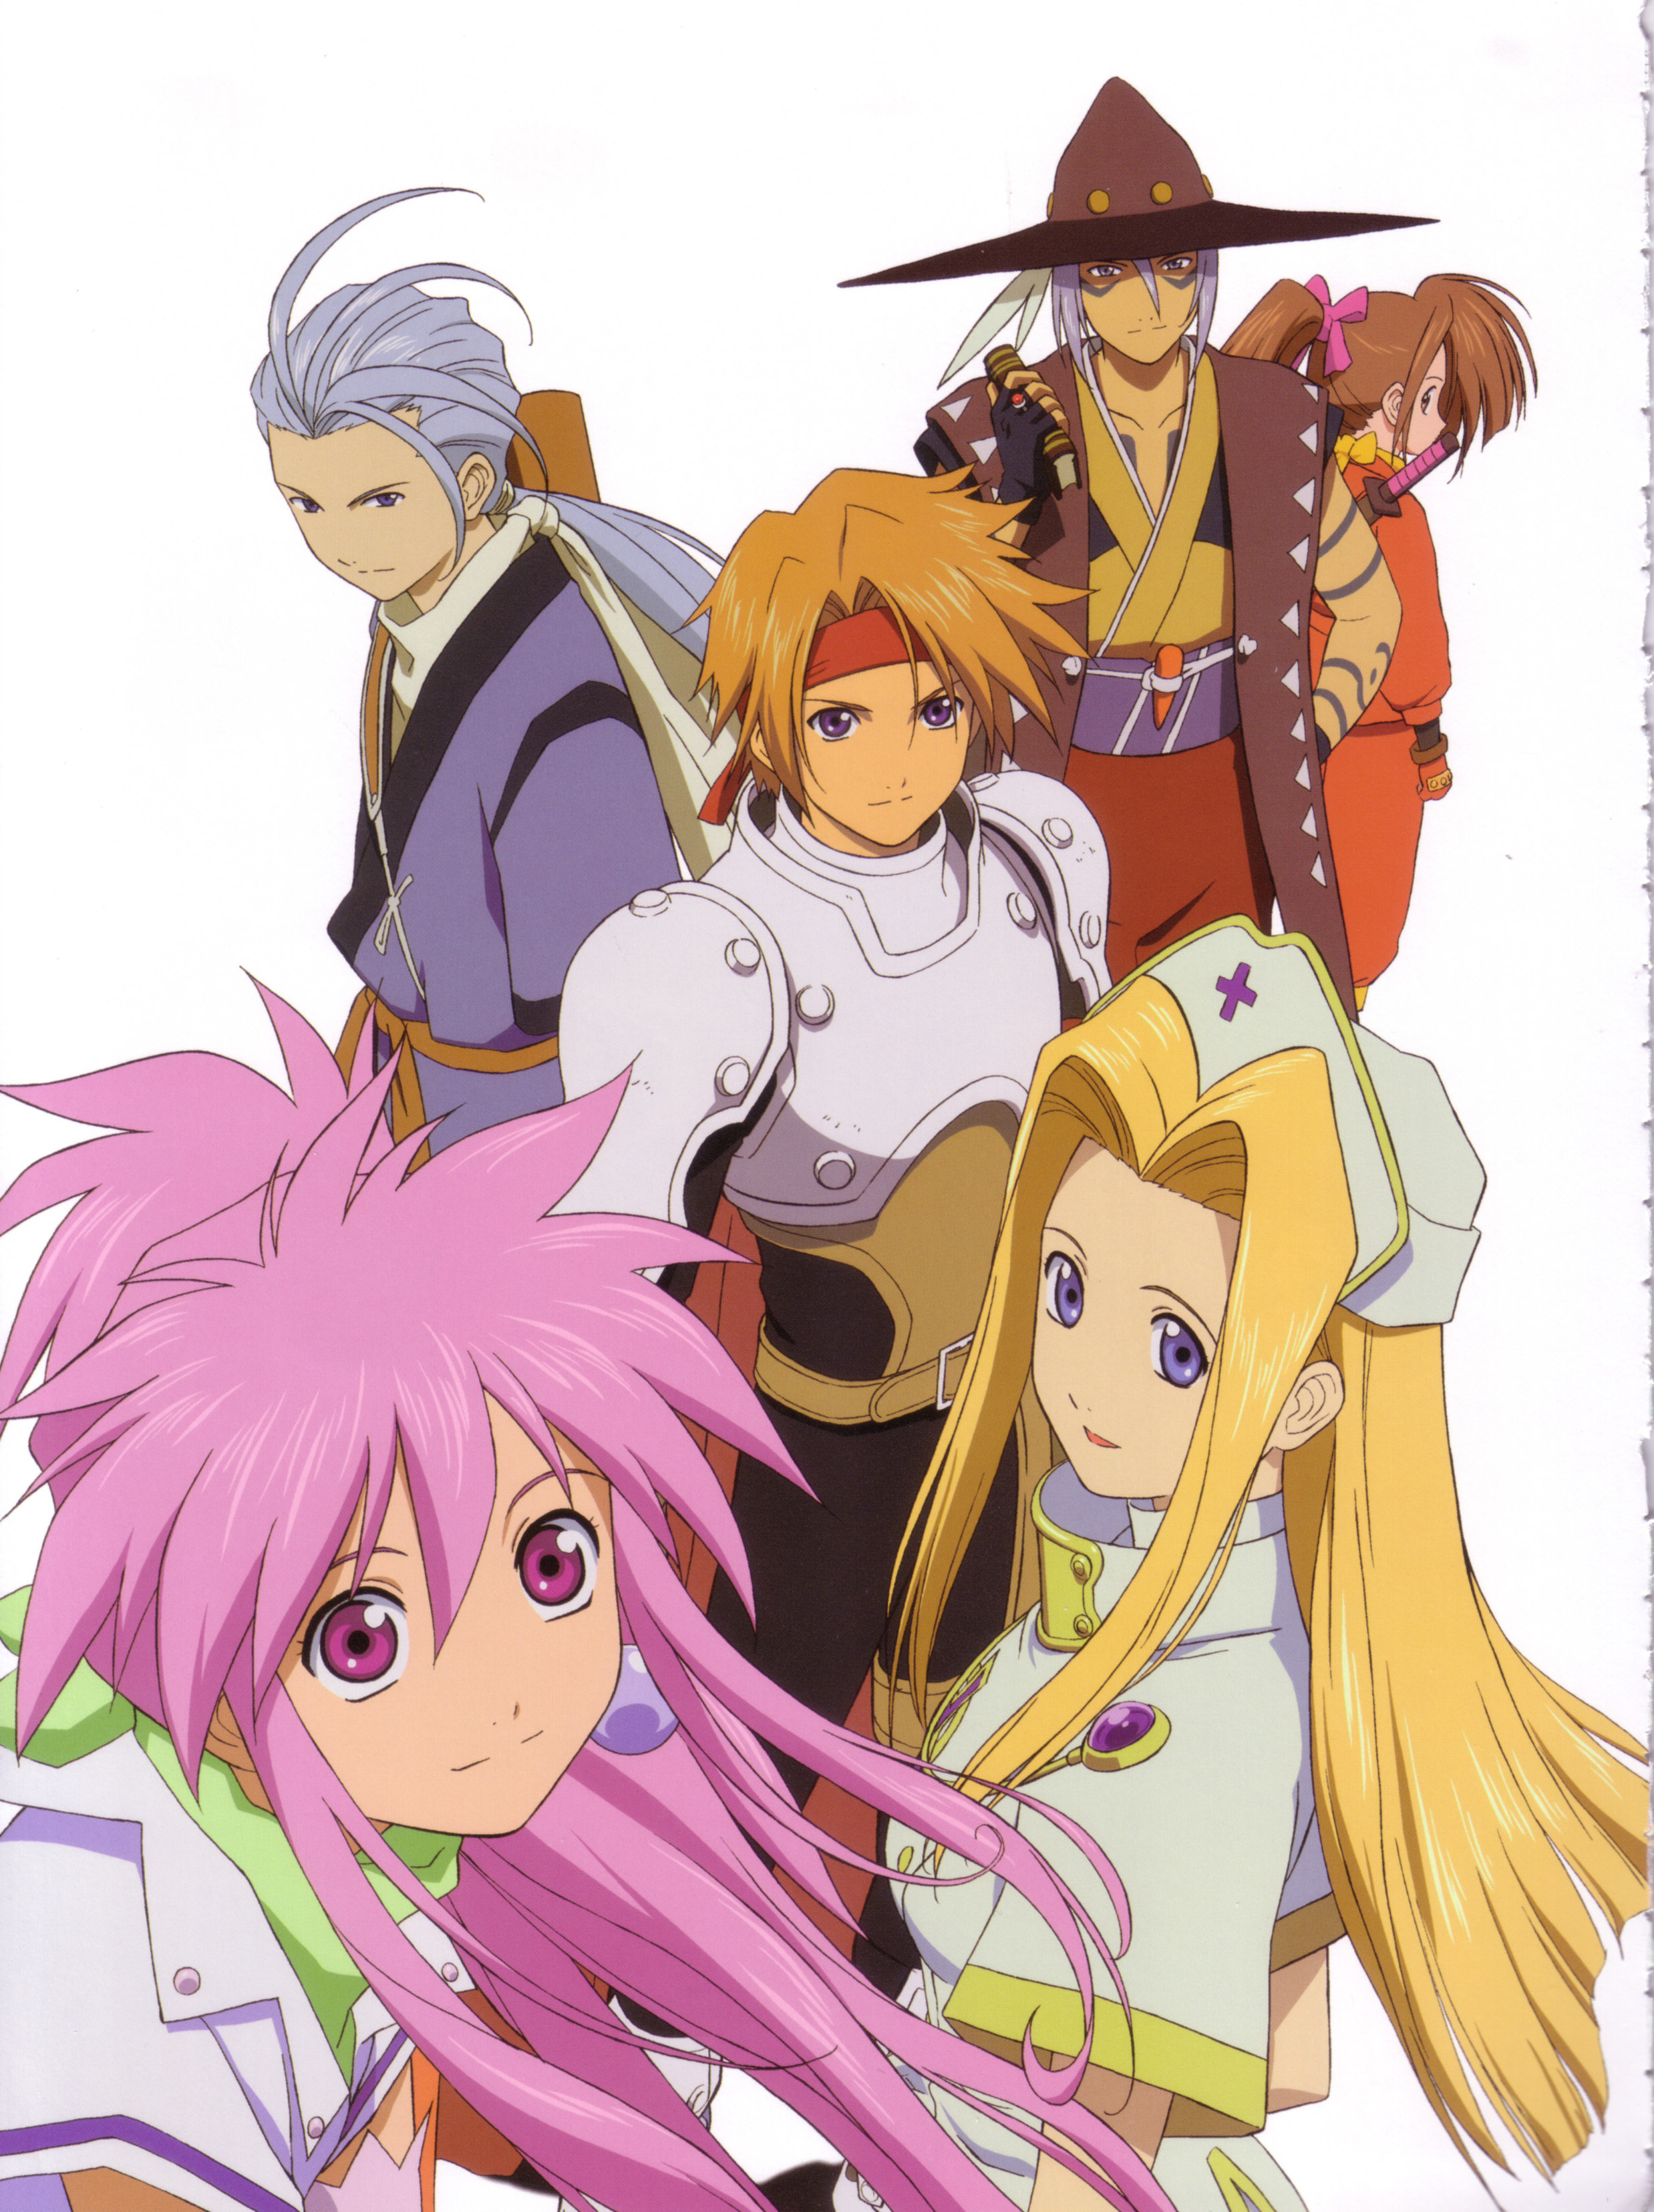 Nice Images Collection: Tales Of Phantasia Desktop Wallpapers